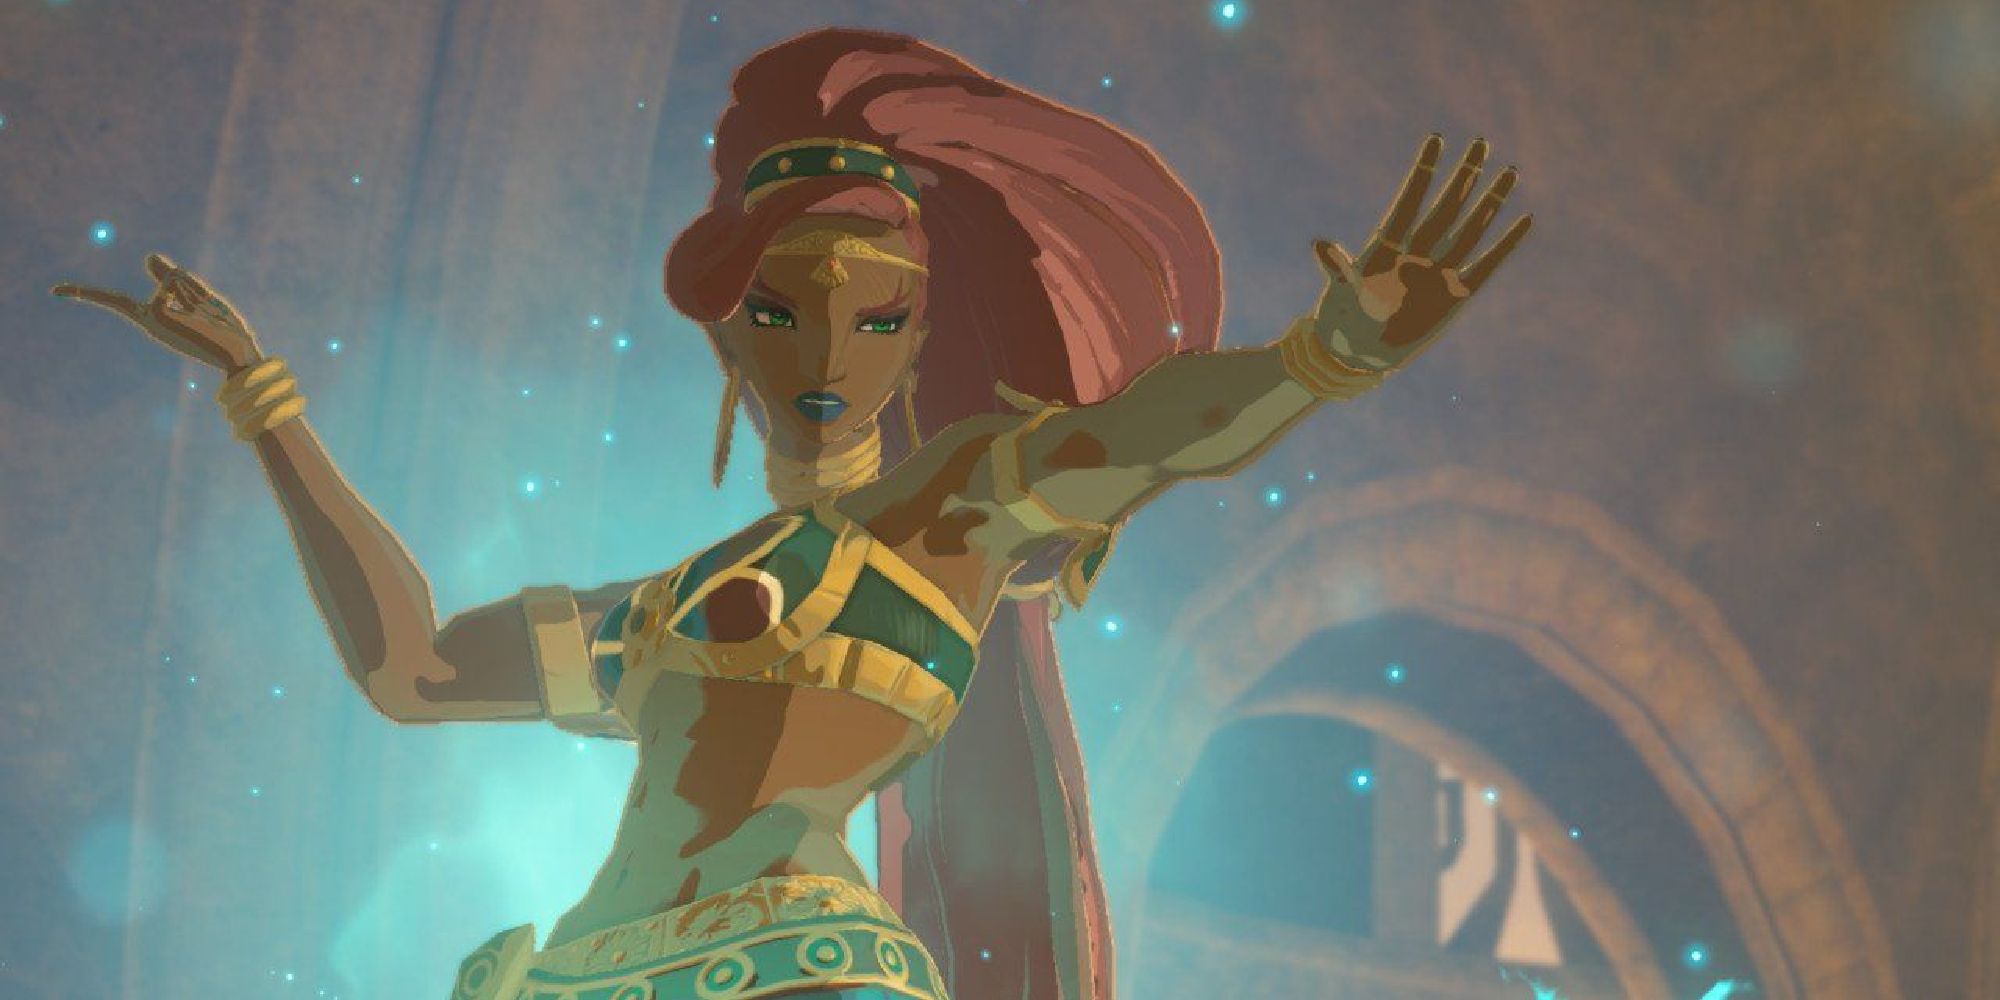 Urbosa appearing to Link as a spirit in Breath of the Wild